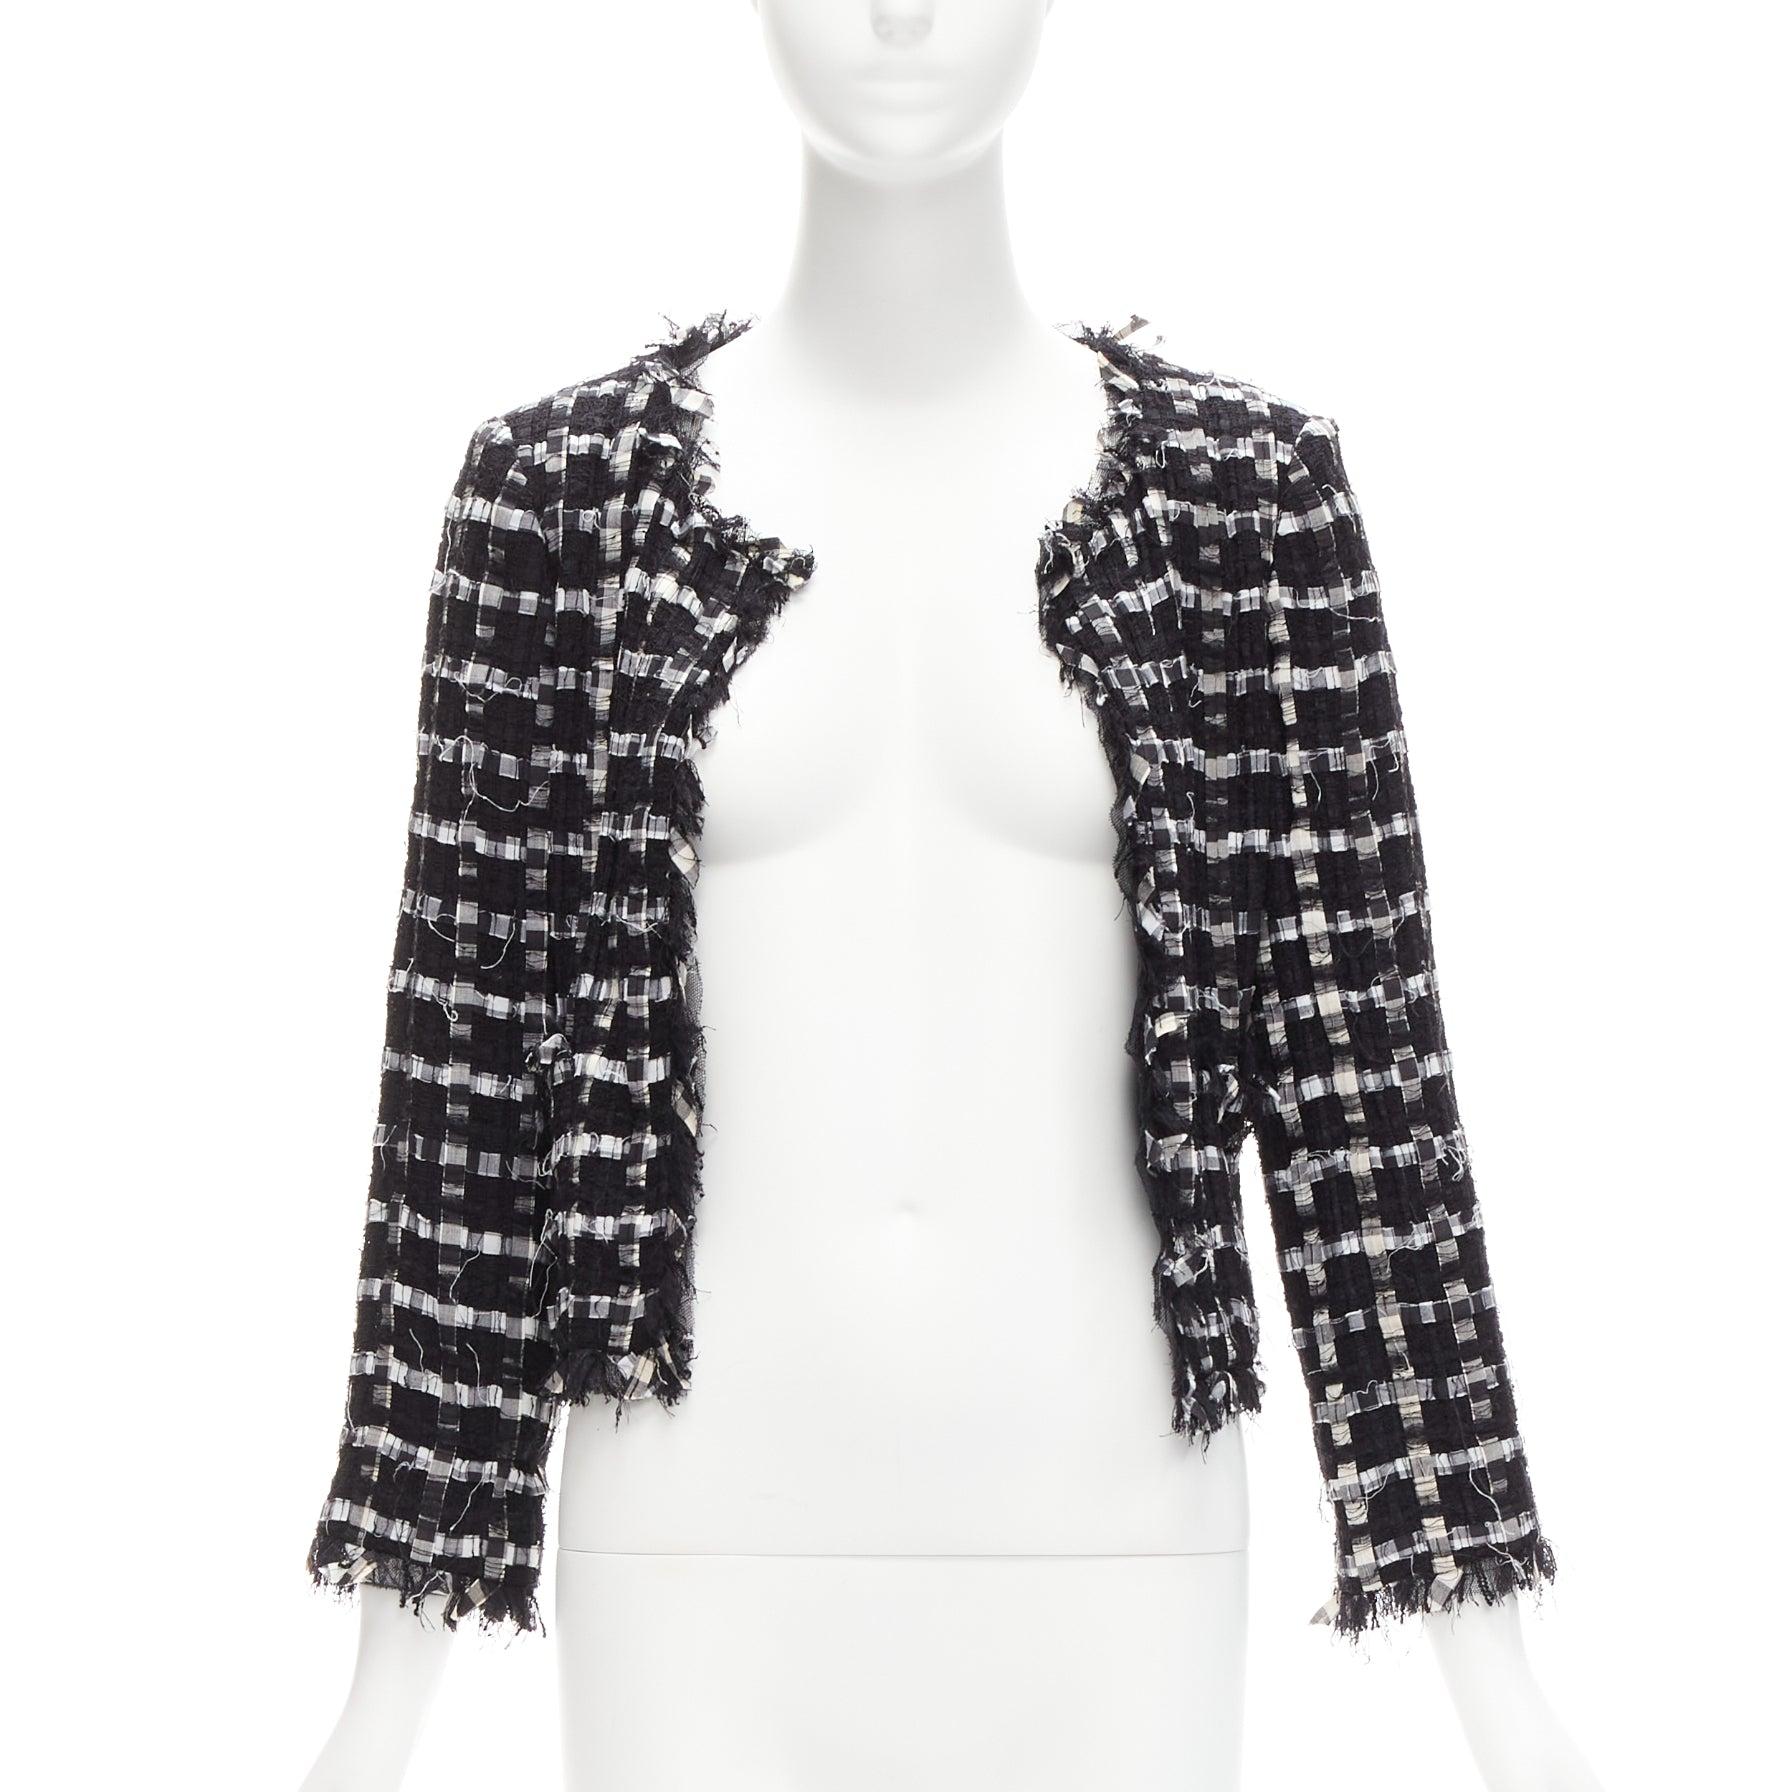 CHANEL black white raw frayed check tweed gripoix buttons cropped jacket FR40 L
Reference: TGAS/D00962
Brand: Chanel
Designer: Karl Lagerfeld
Material: Nylon, Cotton, Blend
Color: Black, White
Pattern: Checkered
Closure: Hook & Eye
Lining: Black